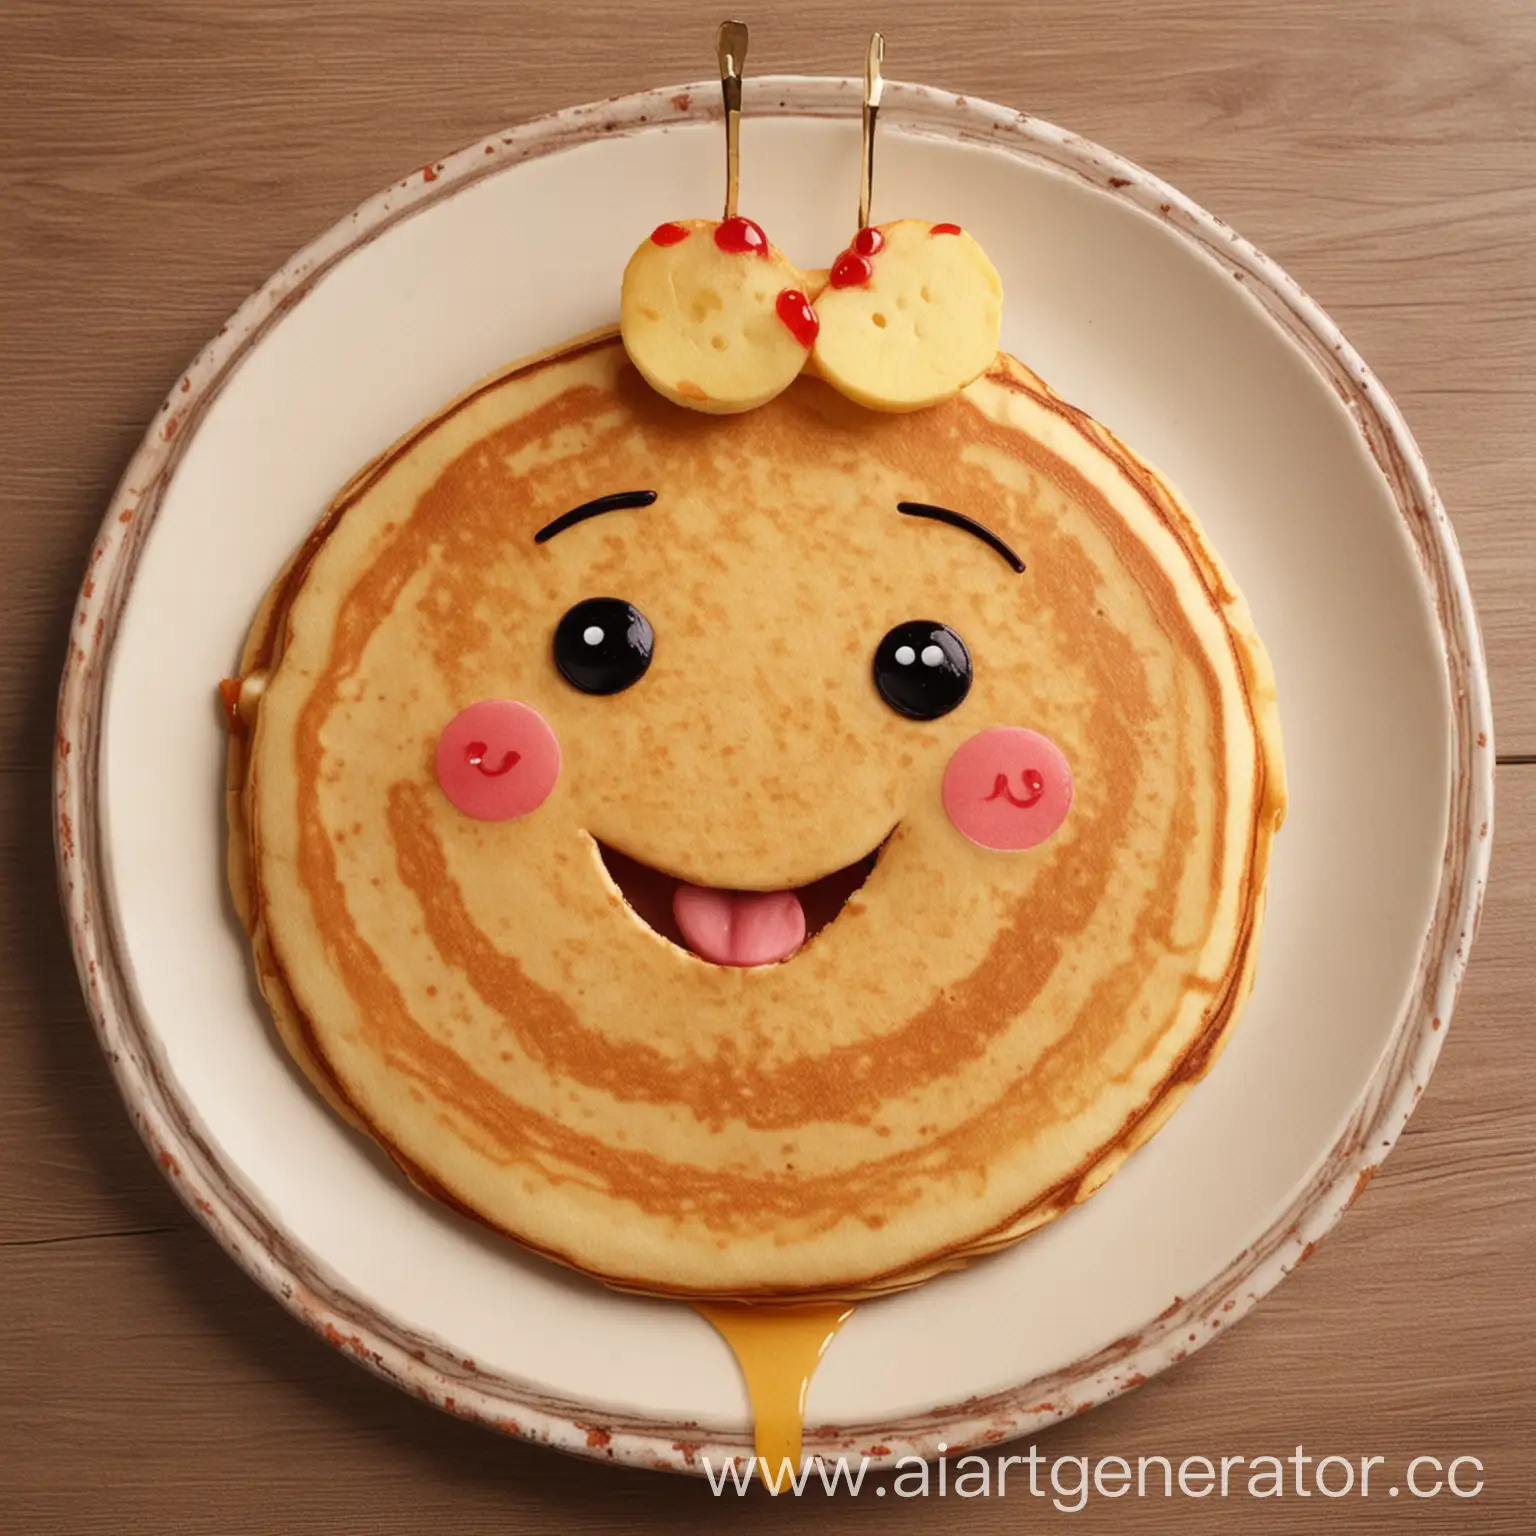 Happy-Breakfast-Colorful-Stack-of-Pancakes-with-Smiling-Faces